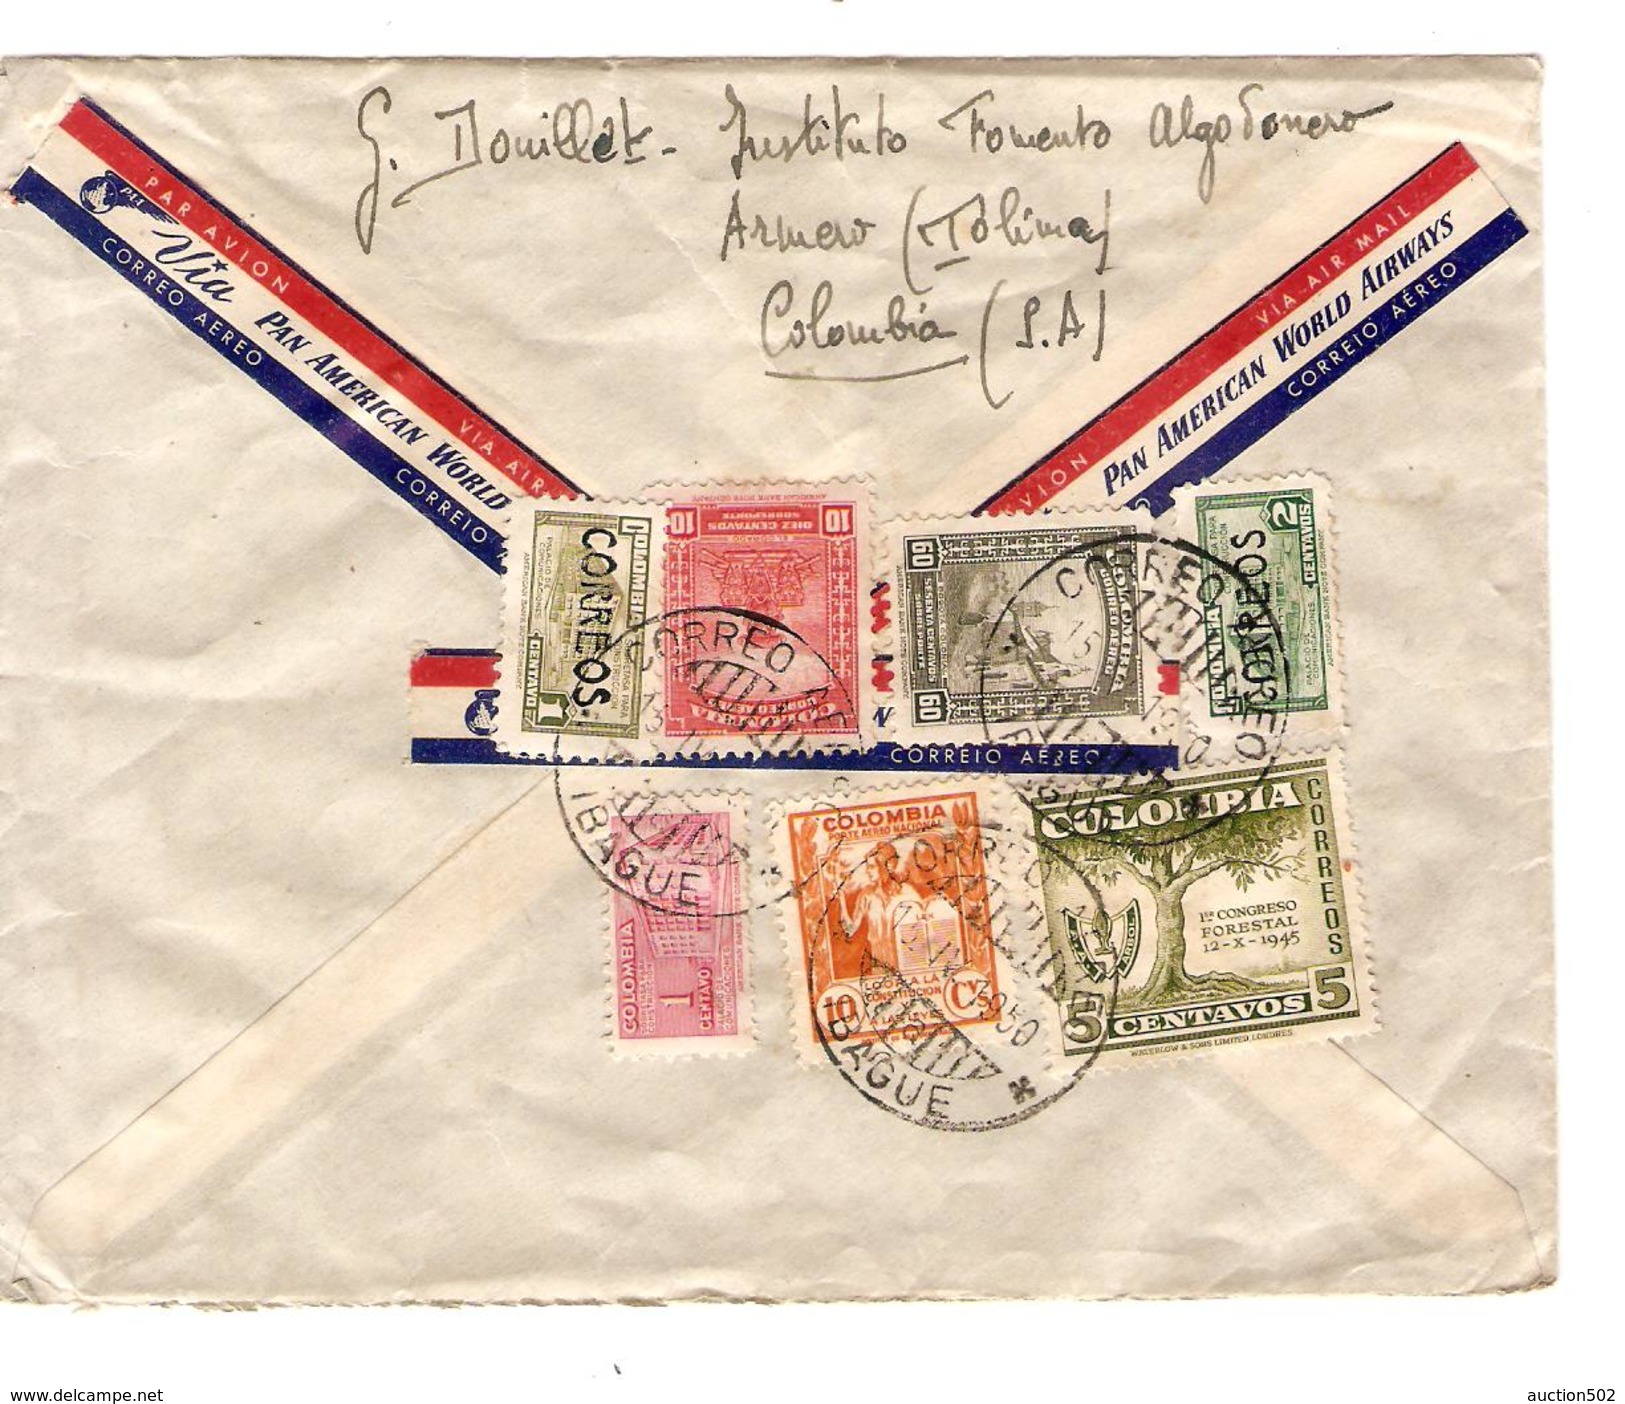 Columbia-Colombie Air Mail Cover C.Ibague 15/4/1950 To Belgium PR4615 - Colombie